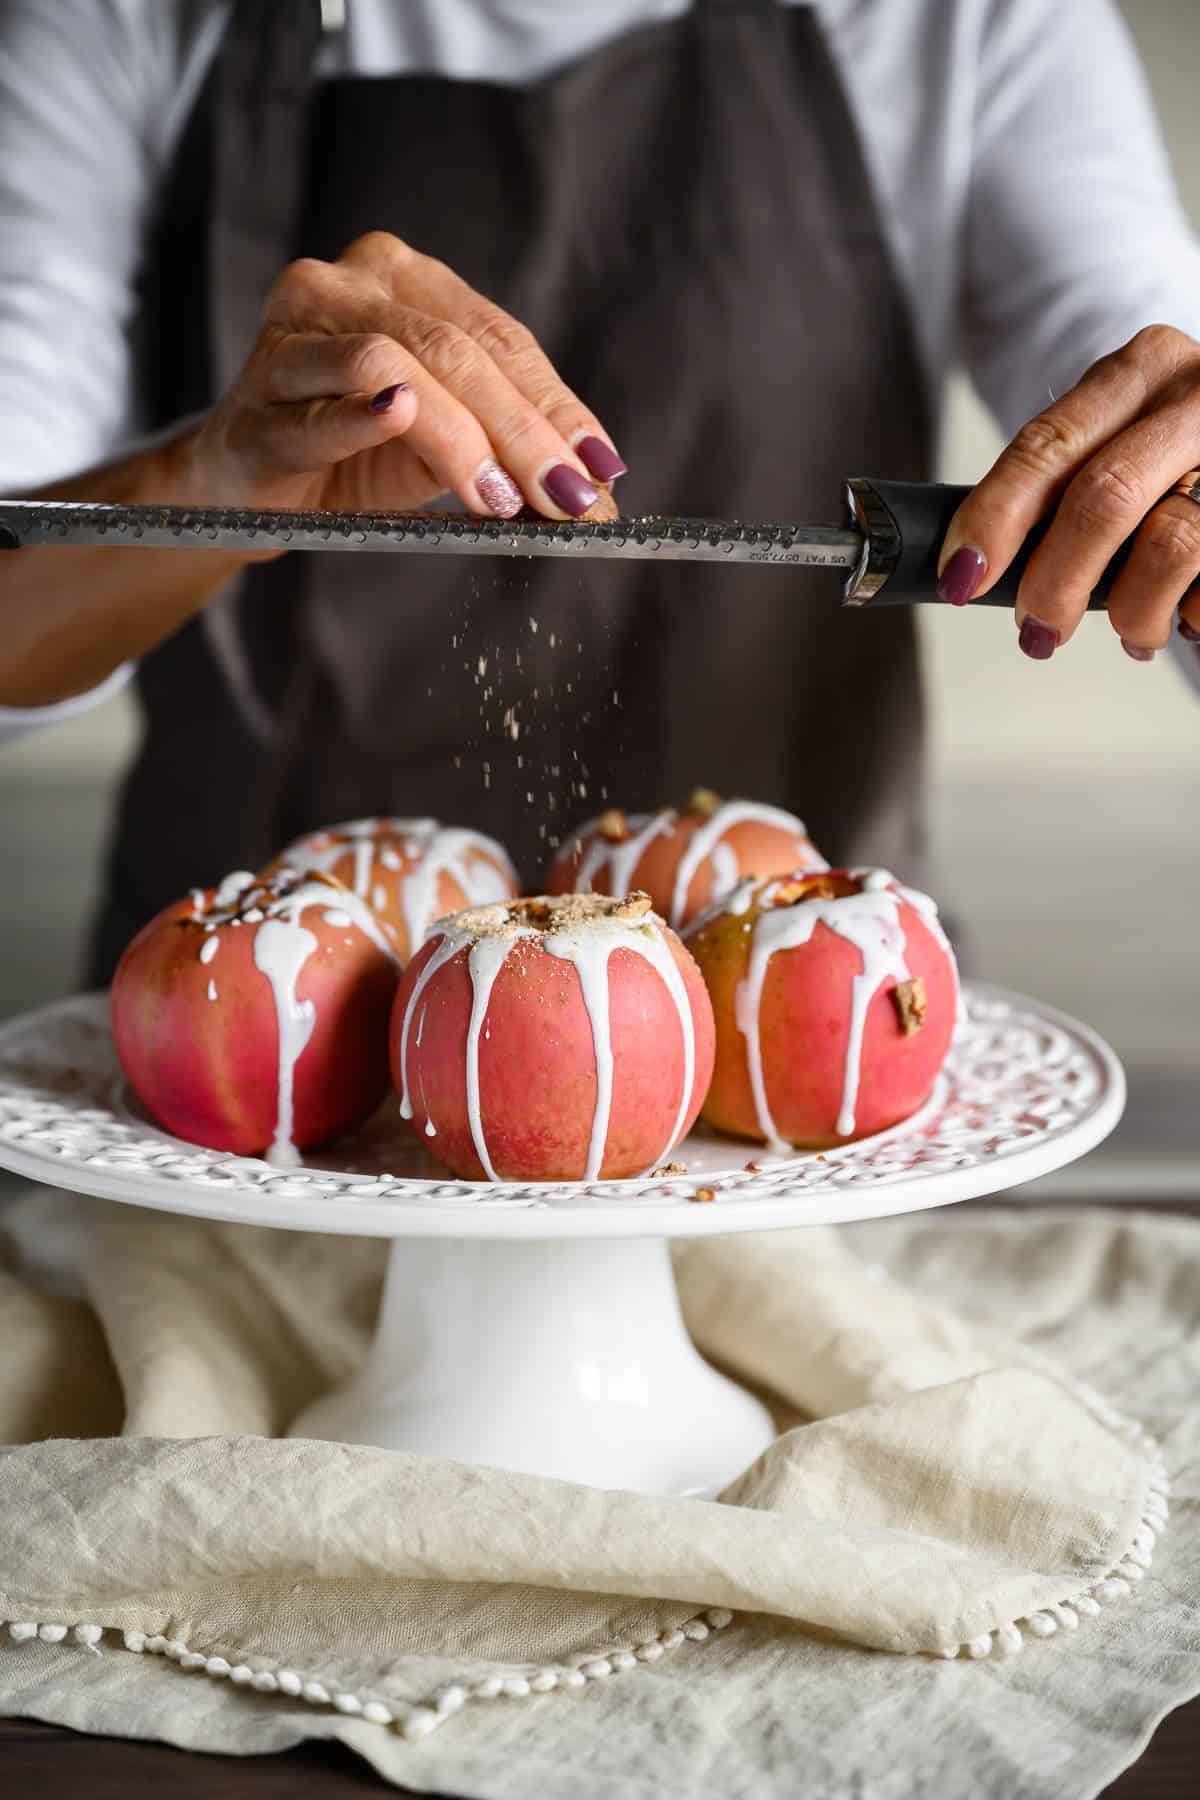 woman using a microplane to grate fresh nutmeg over baked apples